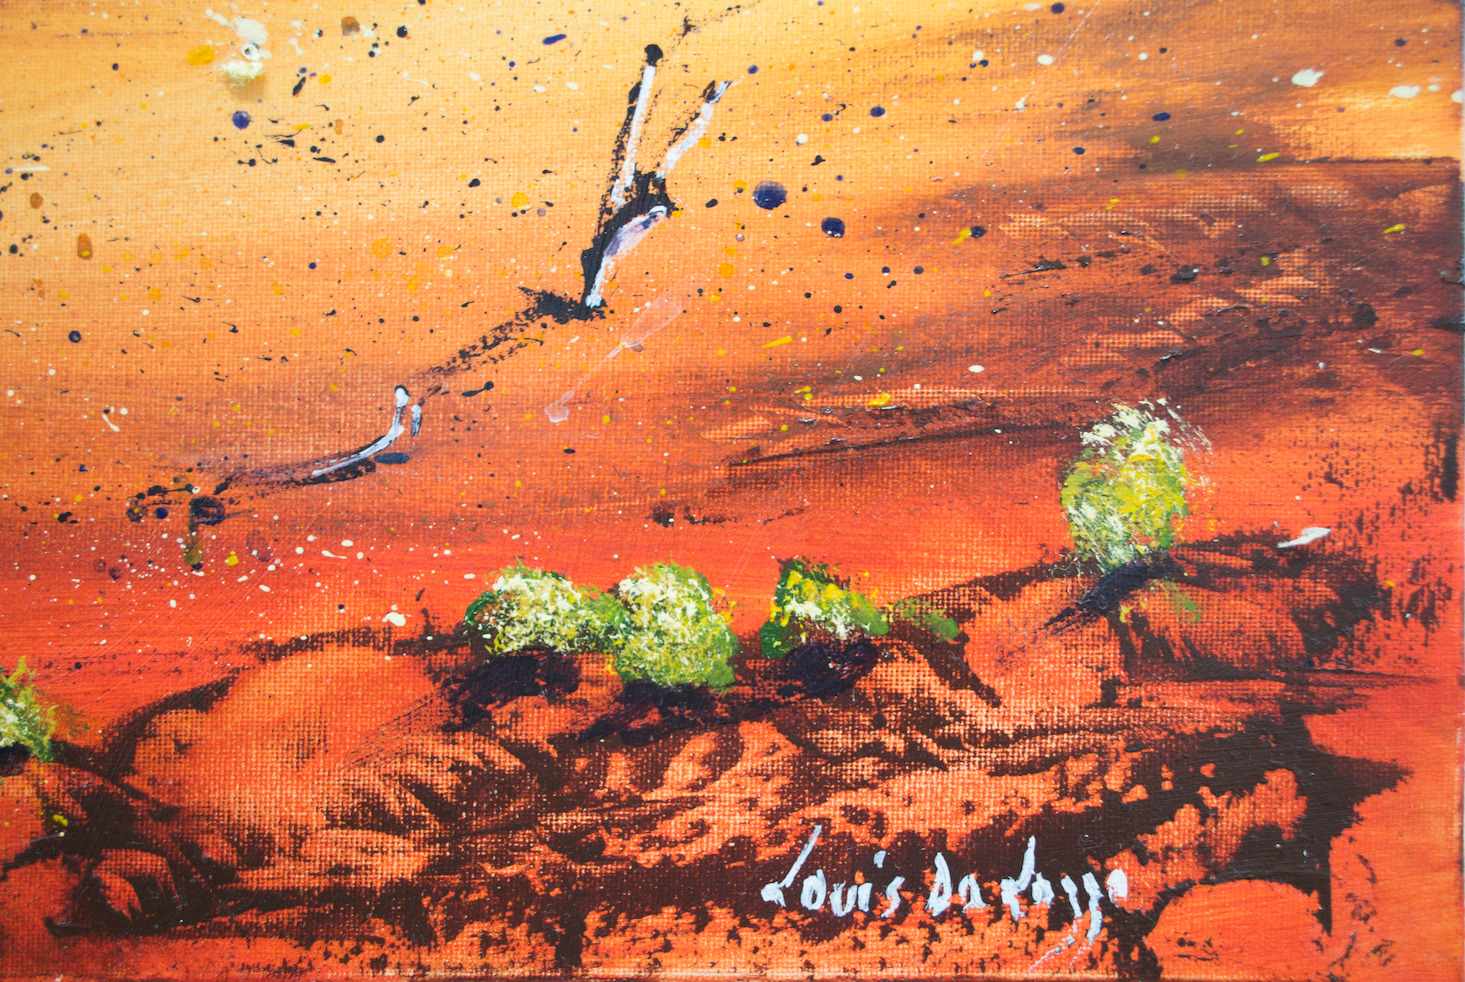 Close Up Signature Of Acrylic Painting "Near Birdsville" By Louis Dalozzo